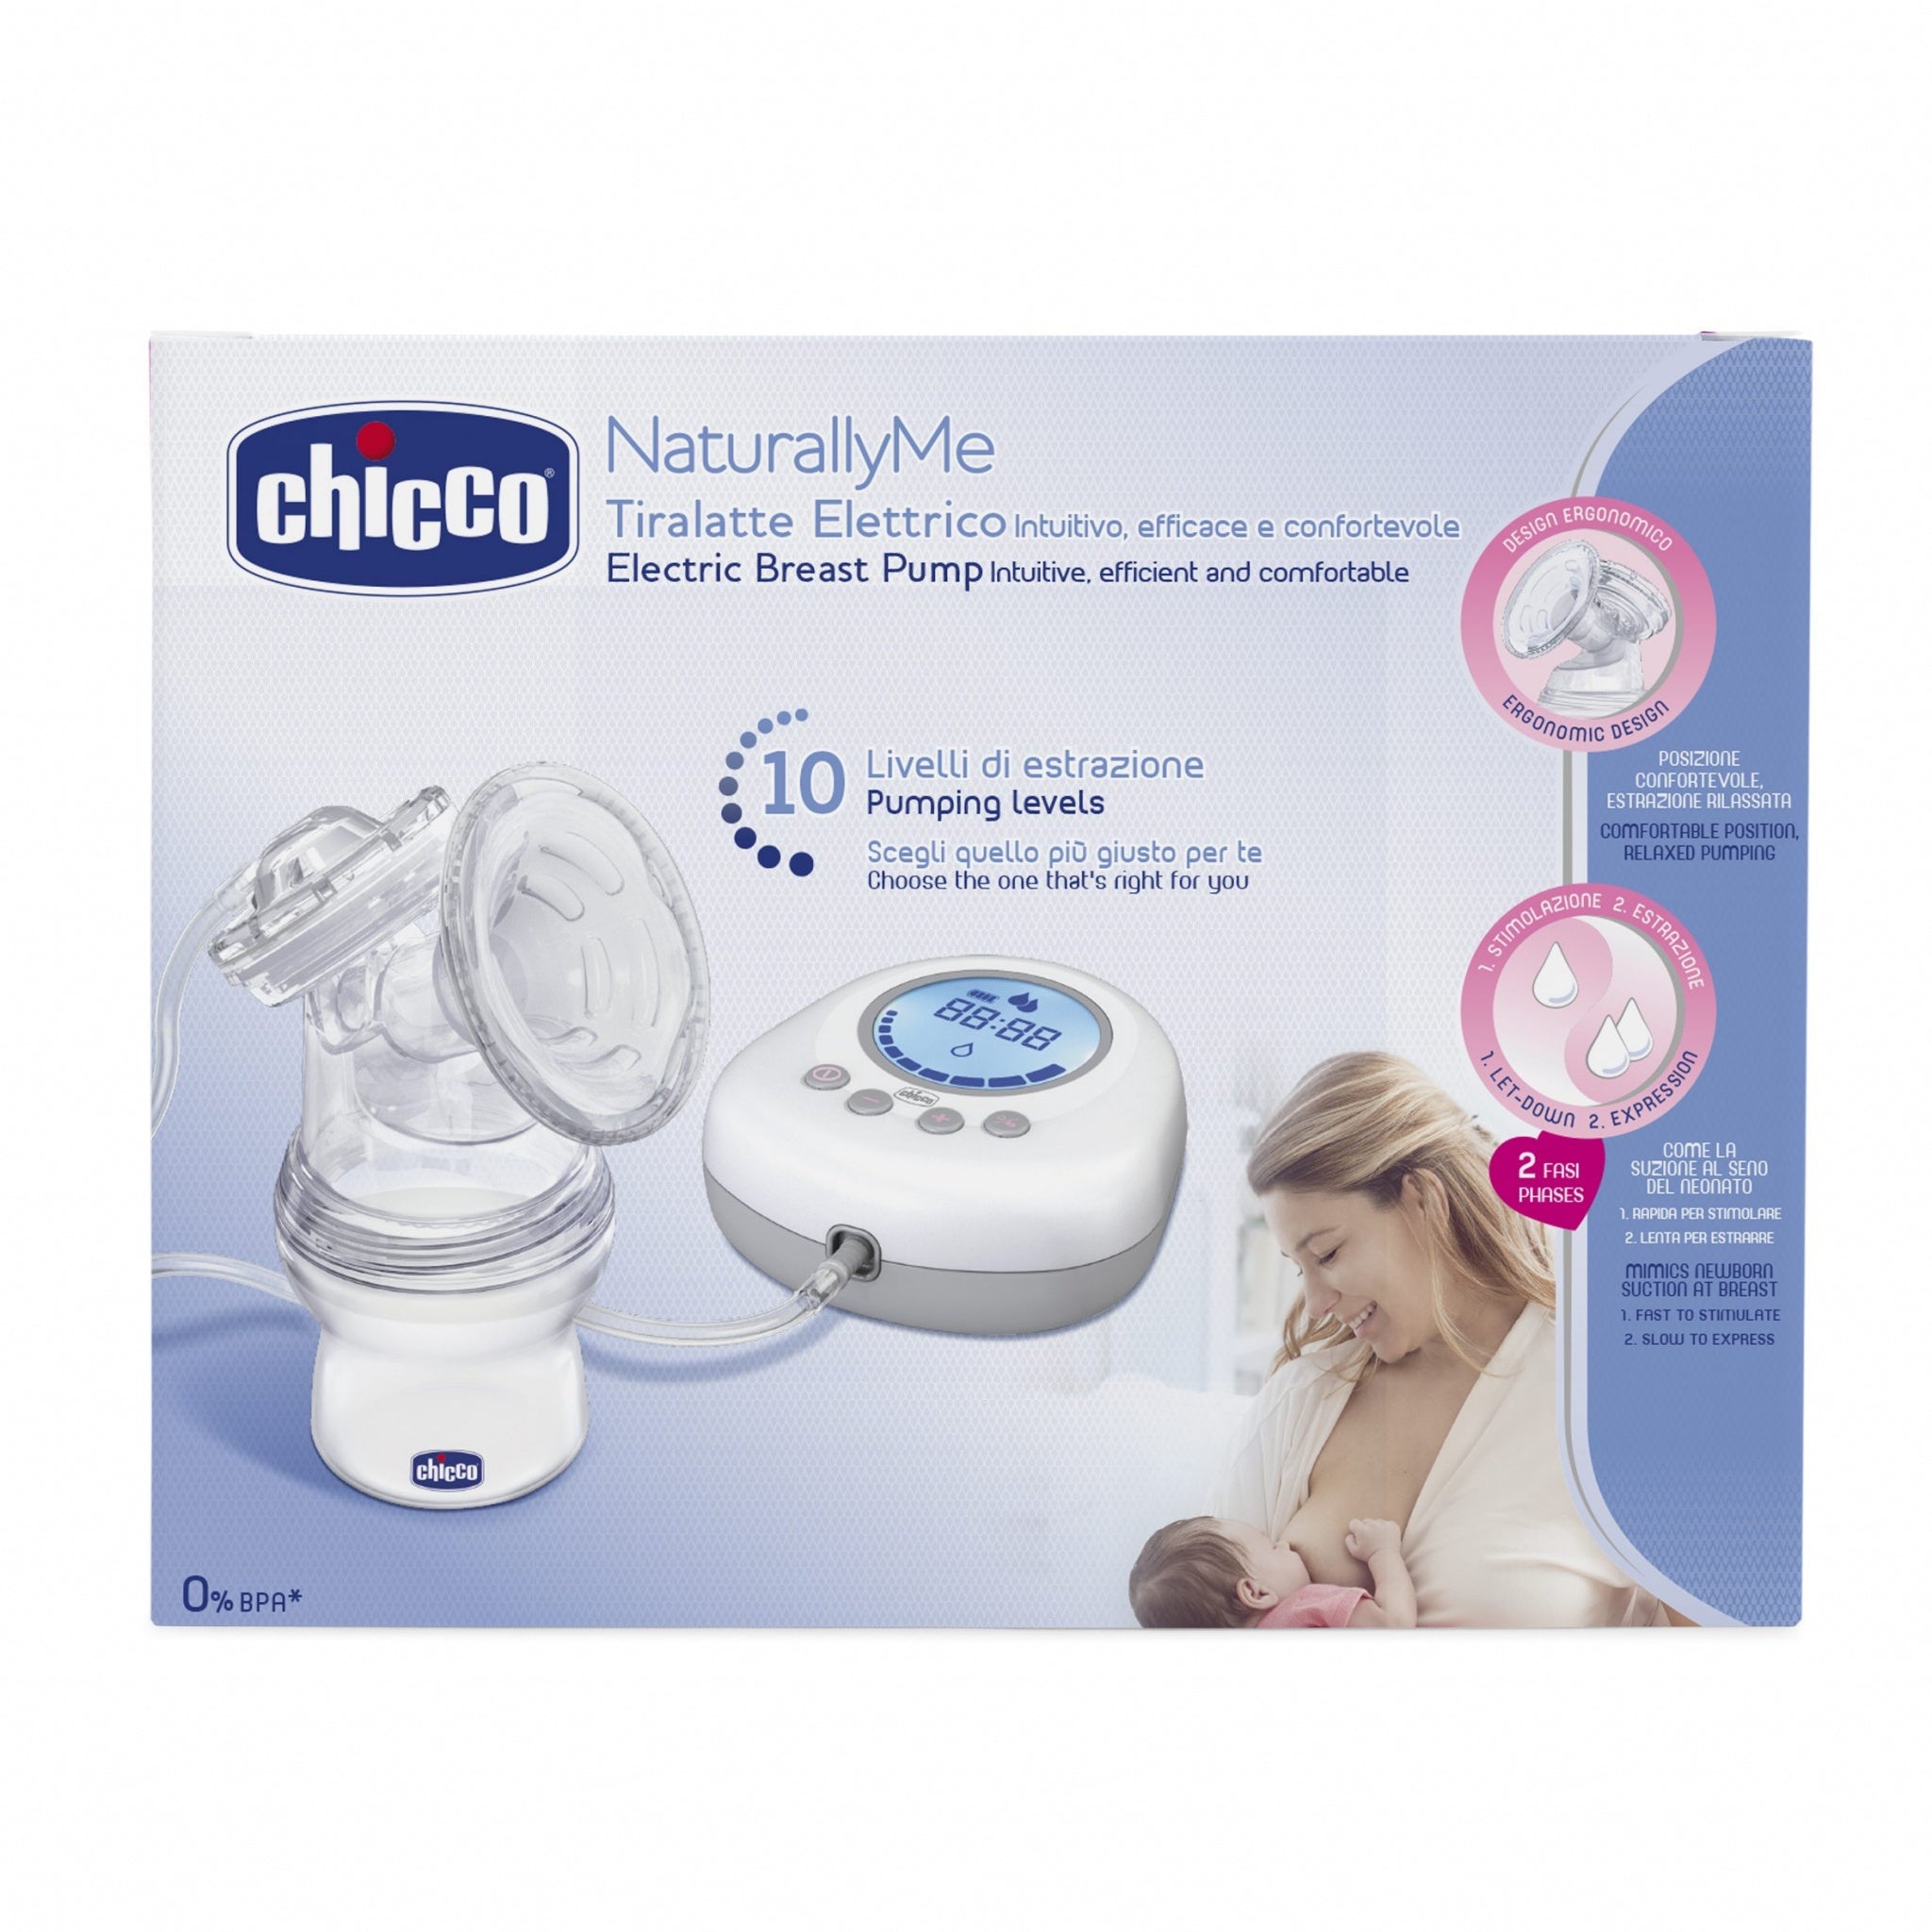 SACALECHES ELECTRICO CHICCO NATURALLY ME